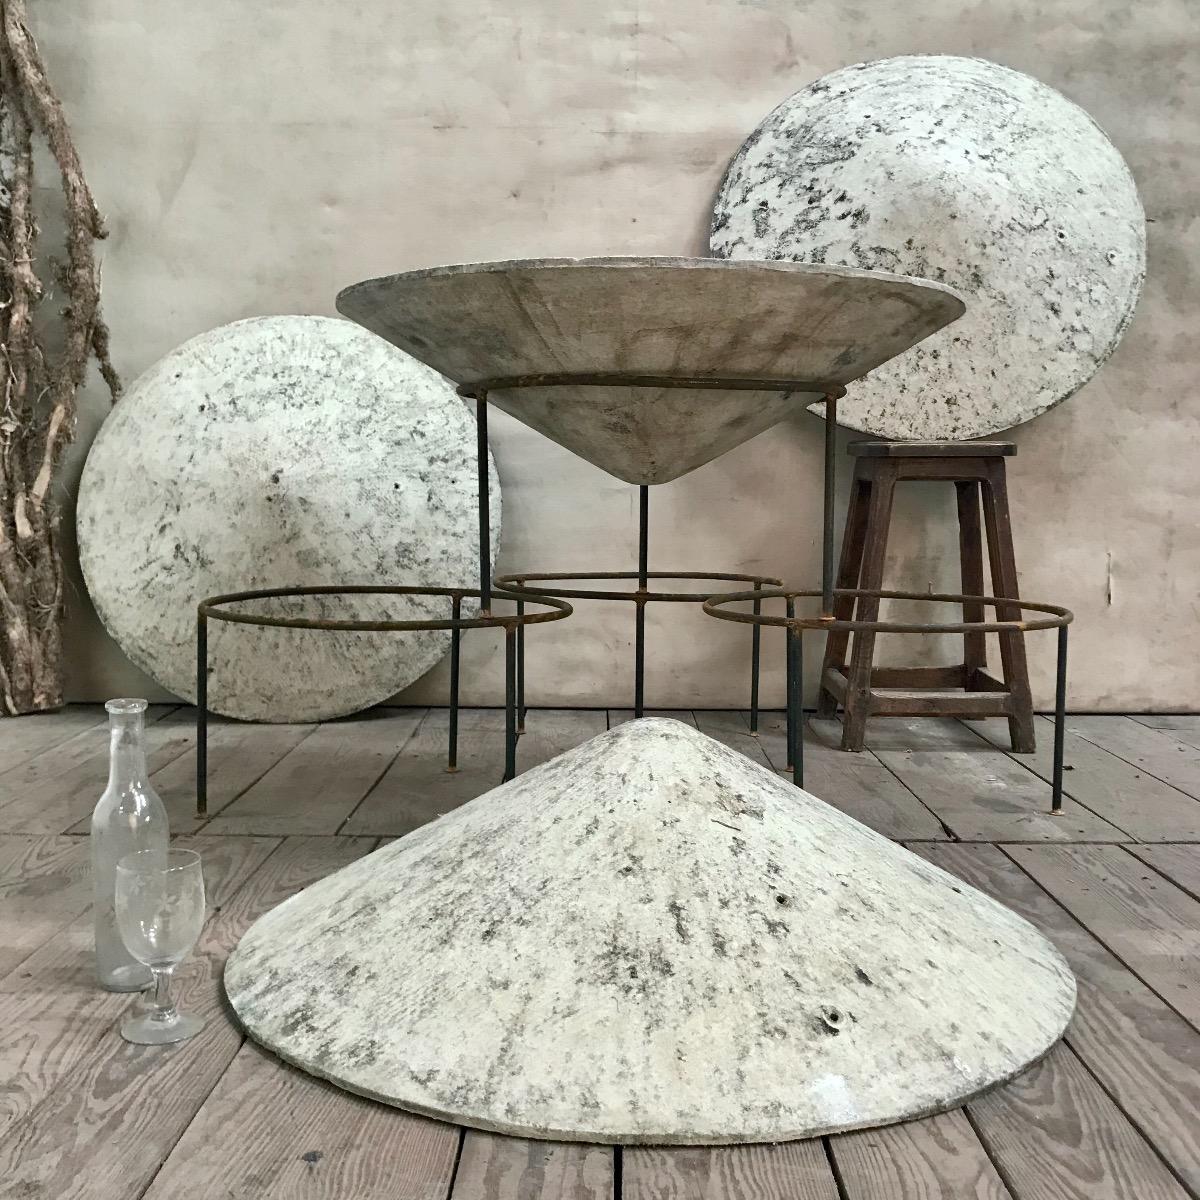 4 large Eternit saucer planters designed by Willy Guhl with wrought iron base.